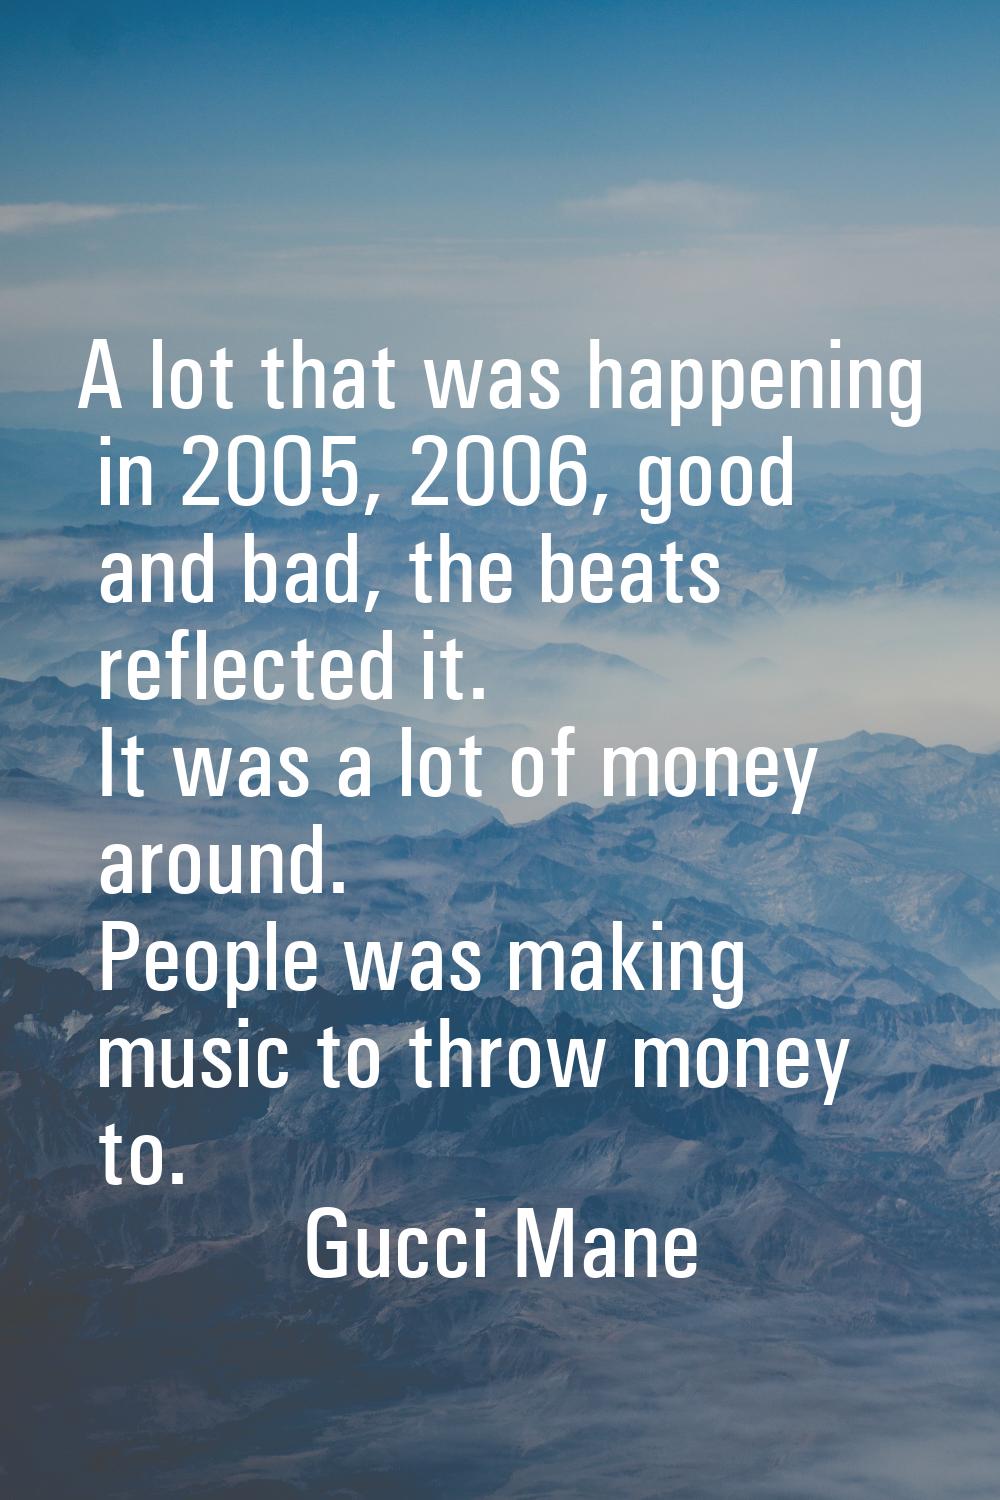 A lot that was happening in 2005, 2006, good and bad, the beats reflected it. It was a lot of money